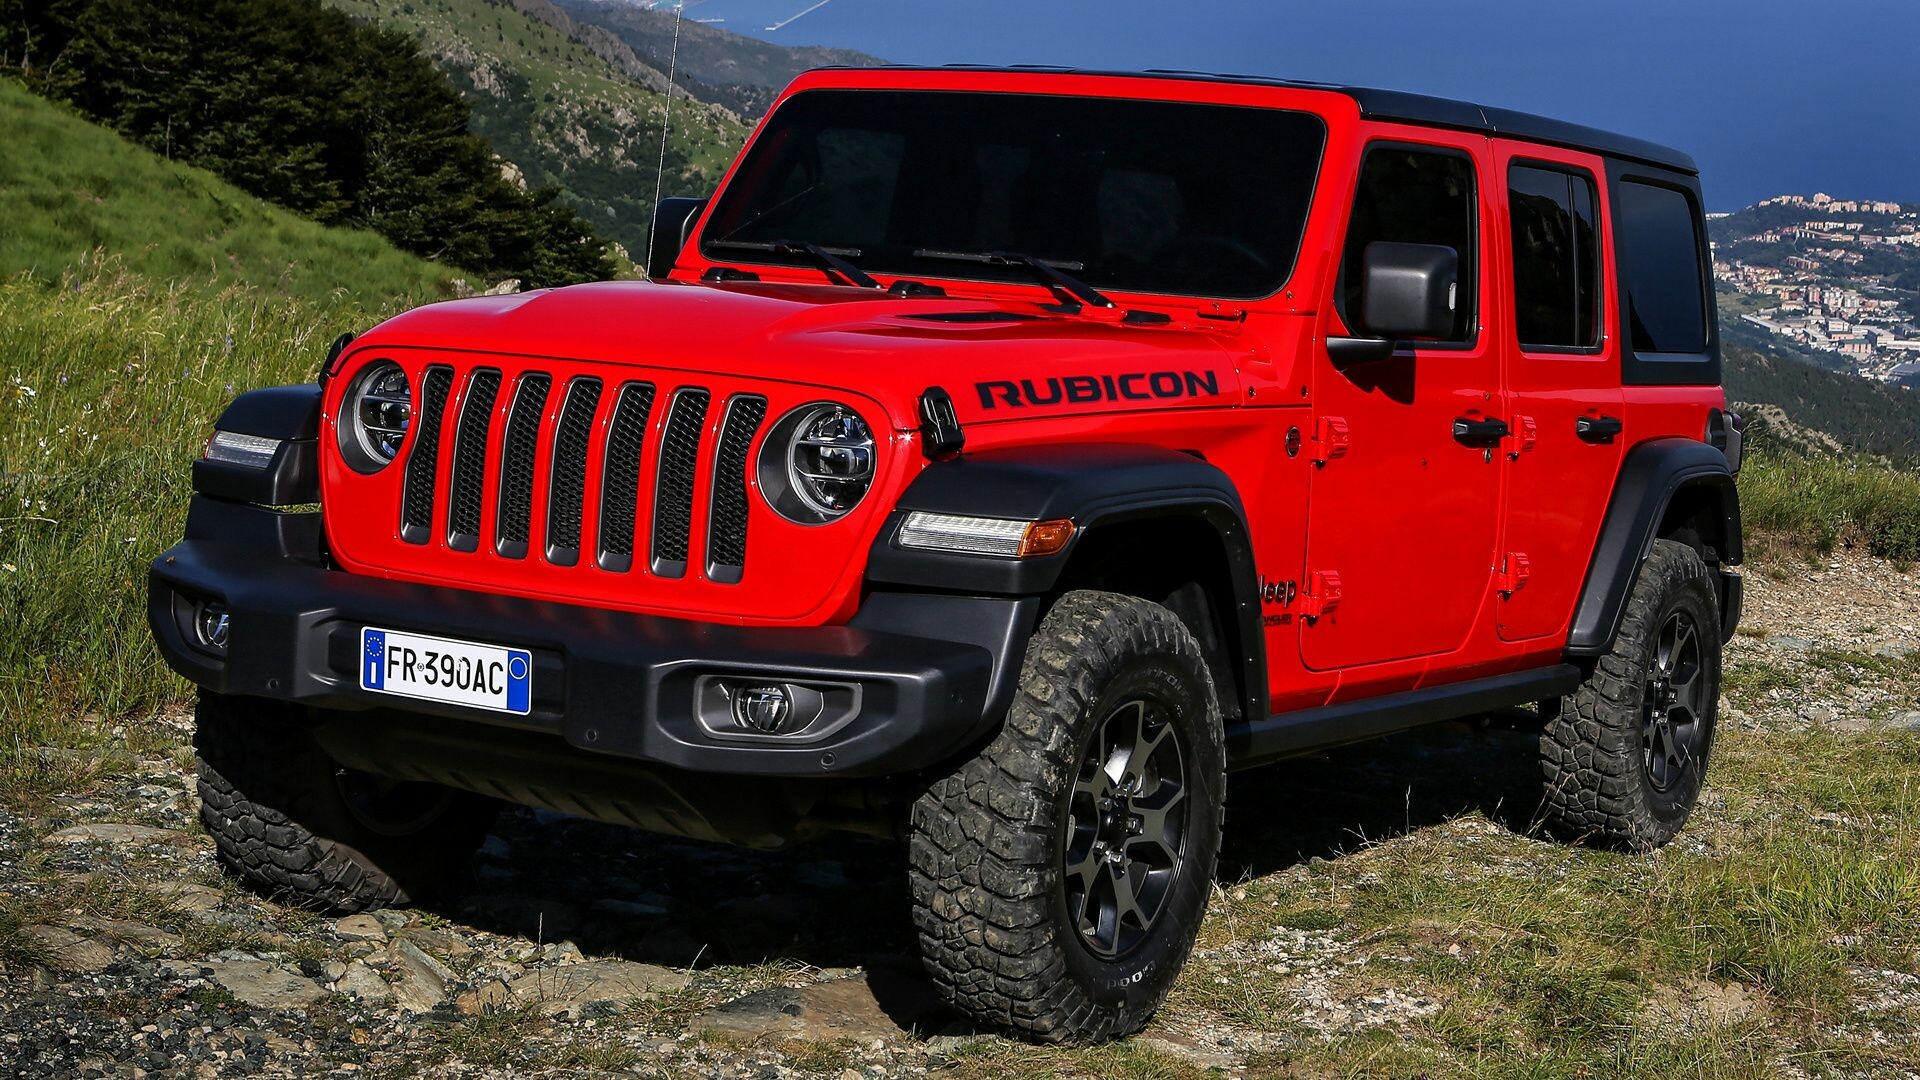 Jeep: Although it's quintessentially American, the brand is part of the multinational automaker Fiat Chrysler Automobiles, which is based in Turin, Italy, but has a North American headquarters in Auburn Hills, Michigan. 1920x1080 Full HD Wallpaper.